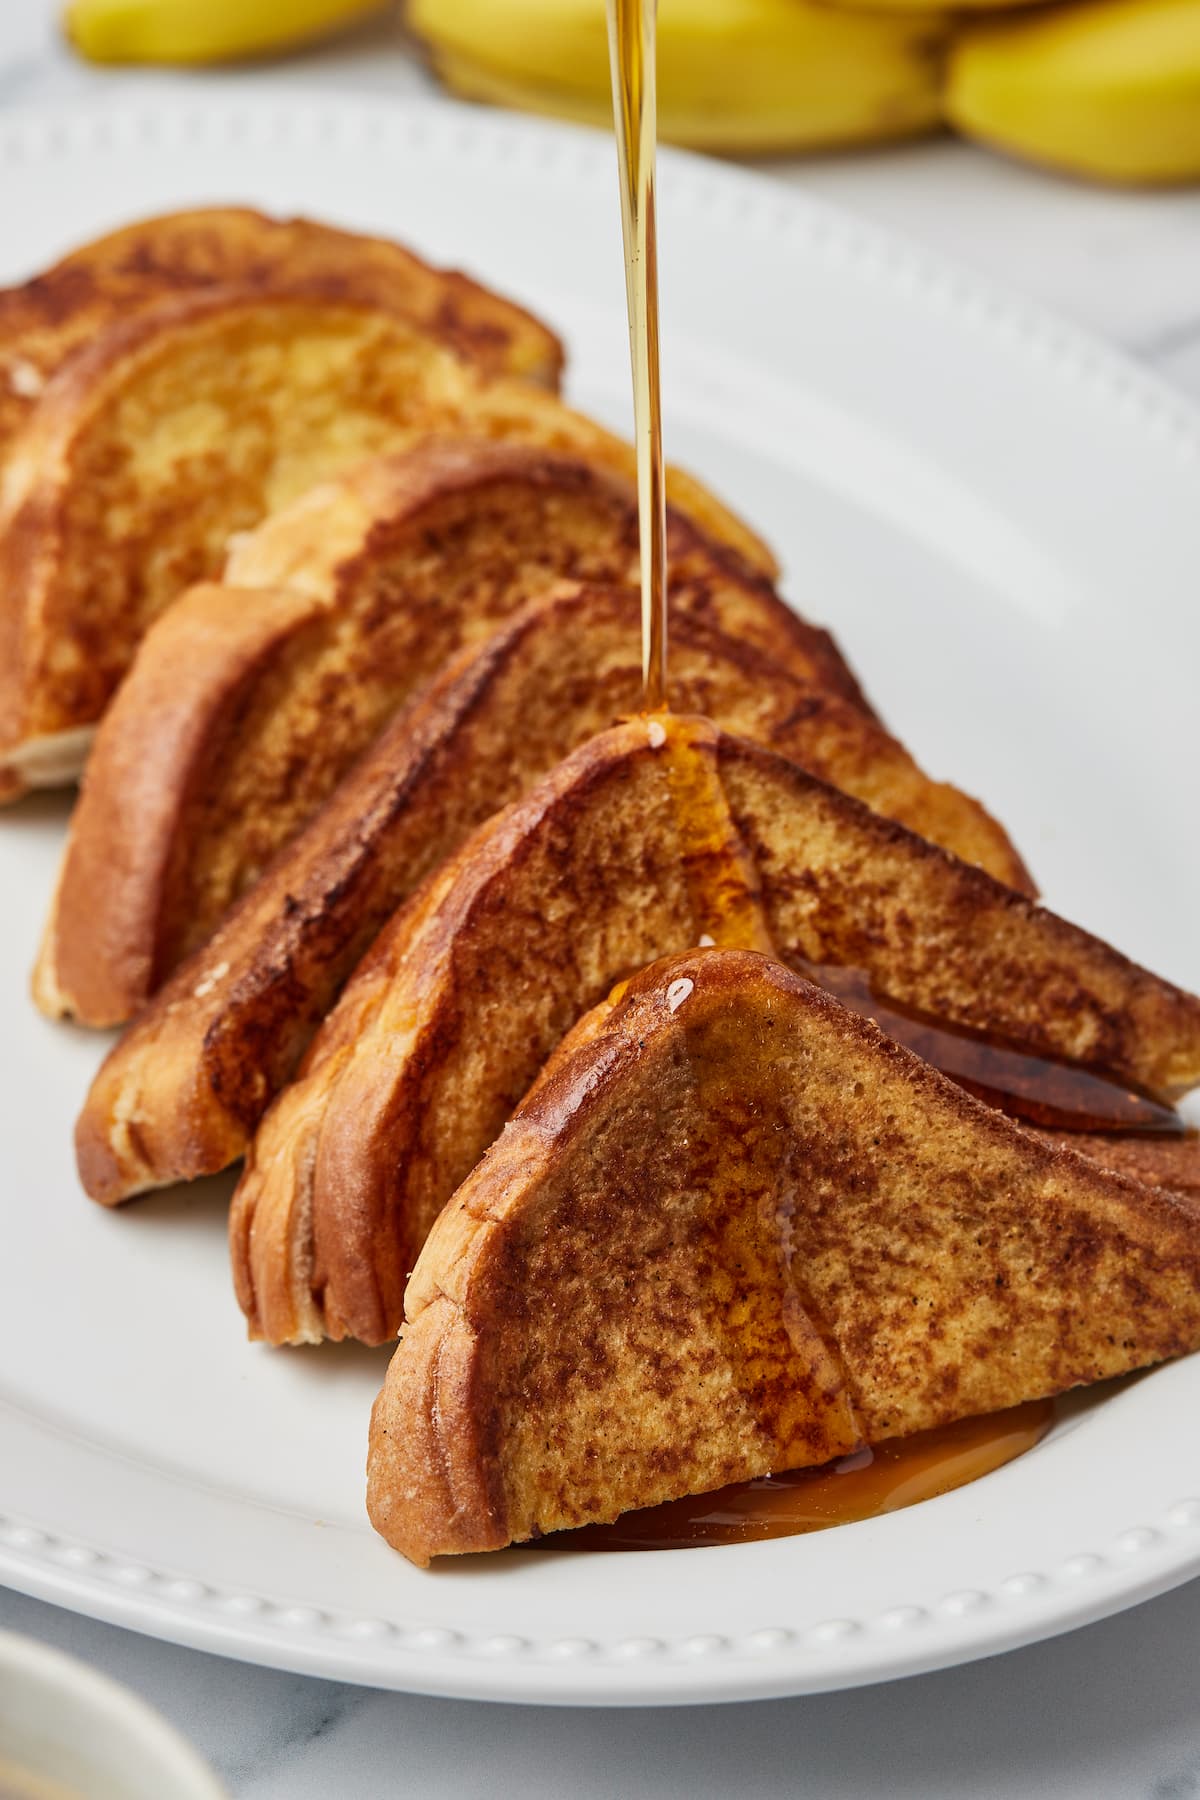 Maple syrup being poured over French toast on a serving platter.